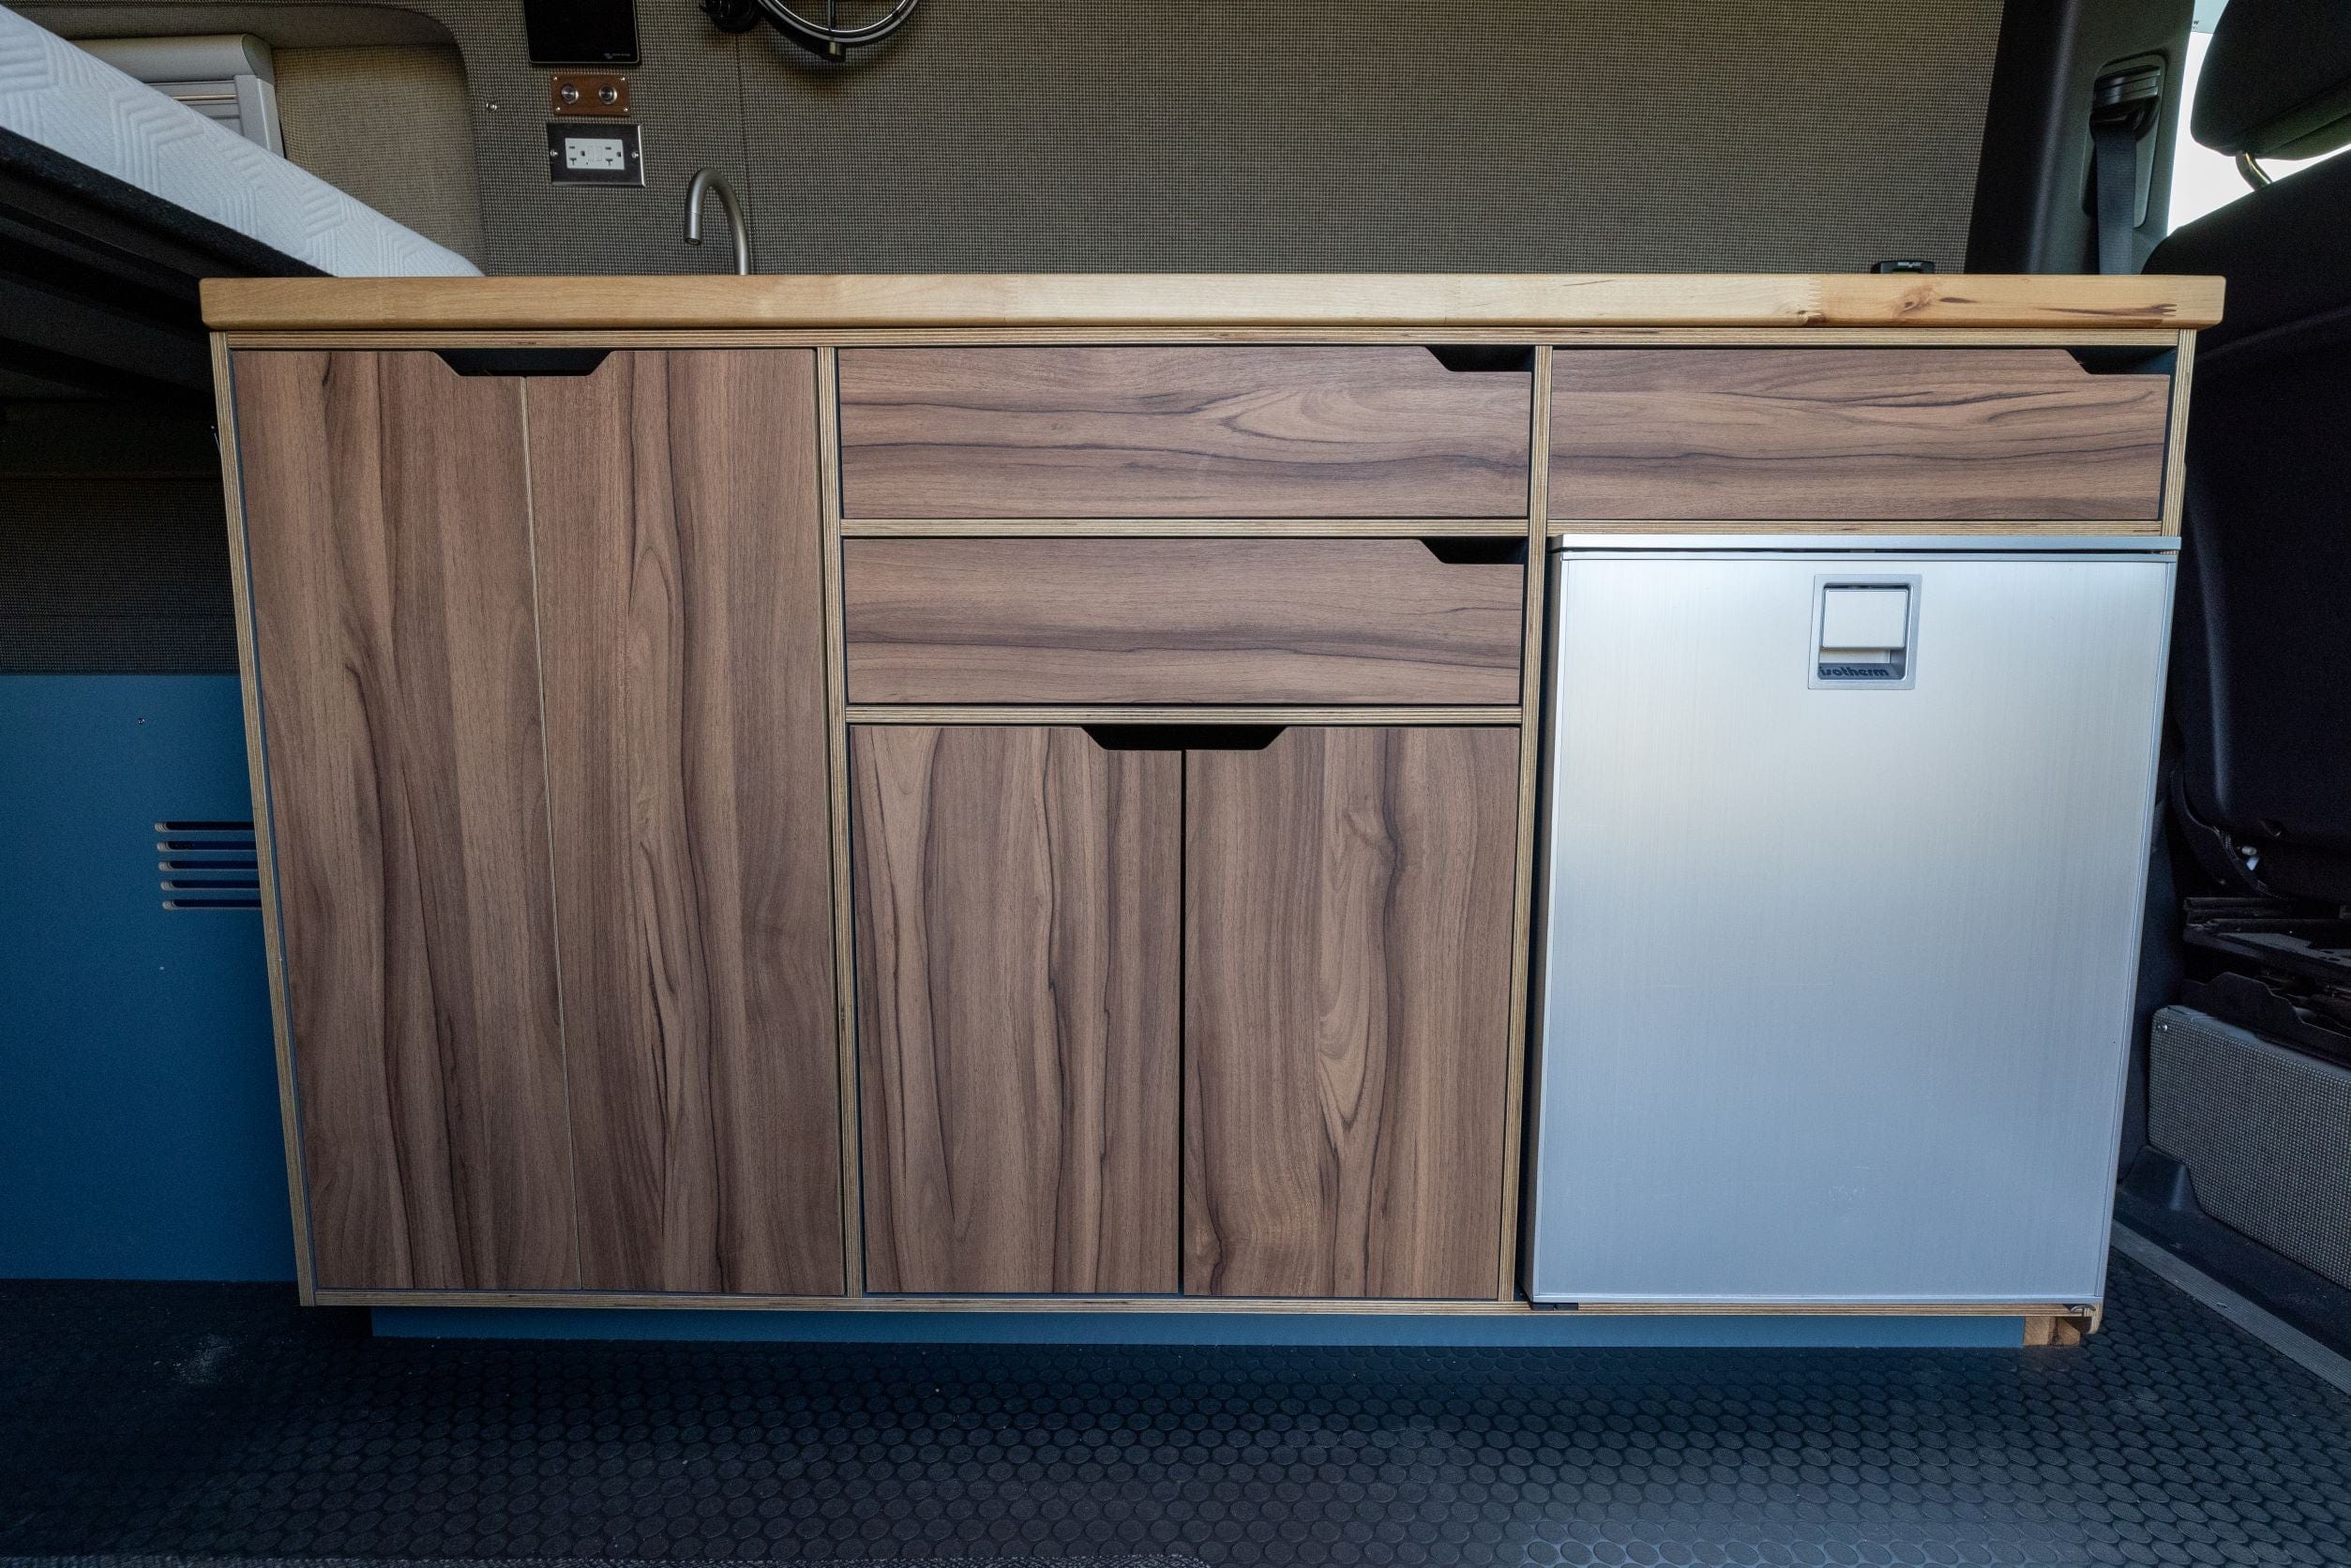 DIY Conversion Van Galley Cabinets for Mercedes Sprinter and Ram ProMaster - 60” for Kitchen and Sink - The Vansmith in Boulder, Colorado